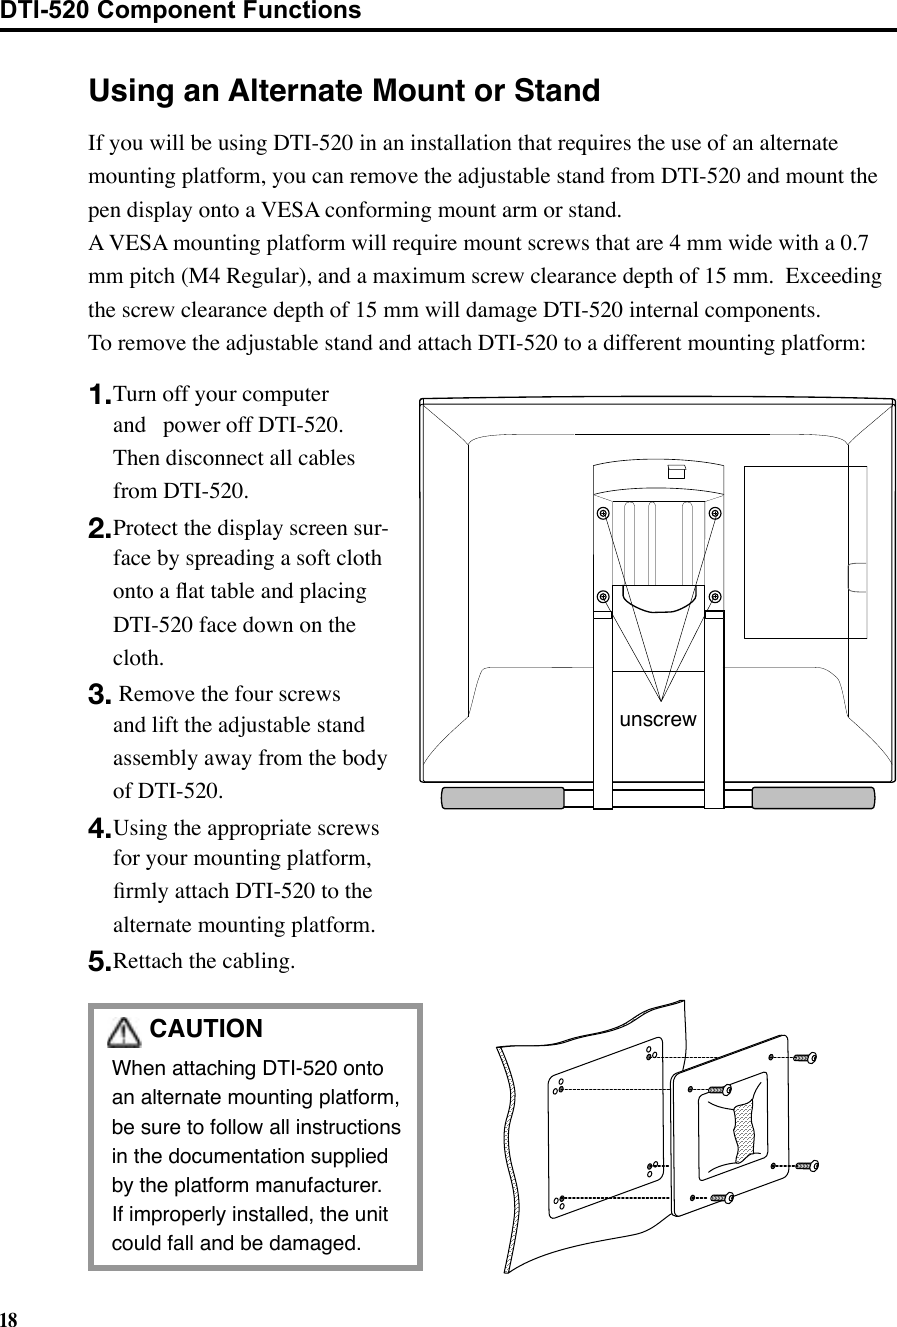 18CAUTION  When attaching DTI-520 onto an alternate mounting platform, be sure to follow all instructions in the documentation supplied by the platform manufacturer.   If improperly installed, the unit could fall and be damaged.Using an Alternate Mount or Standunscrew1. Turn off your computer and   power off DTI-520.  Then disconnect all cables from DTI-520.2. Protect the display screen sur-face by spreading a soft cloth onto a ﬂat table and placing DTI-520 face down on the cloth.3.  Remove the four screws and lift the adjustable stand assembly away from the body of DTI-520.4. Using the appropriate screws for your mounting platform, ﬁrmly attach DTI-520 to the alternate mounting platform.5. Rettach the cabling.If you will be using DTI-520 in an installation that requires the use of an alternate mounting platform, you can remove the adjustable stand from DTI-520 and mount the pen display onto a VESA conforming mount arm or stand.   A VESA mounting platform will require mount screws that are 4 mm wide with a 0.7 mm pitch (M4 Regular), and a maximum screw clearance depth of 15 mm.  Exceeding the screw clearance depth of 15 mm will damage DTI-520 internal components.To remove the adjustable stand and attach DTI-520 to a different mounting platform:DTI-520 Component Functions